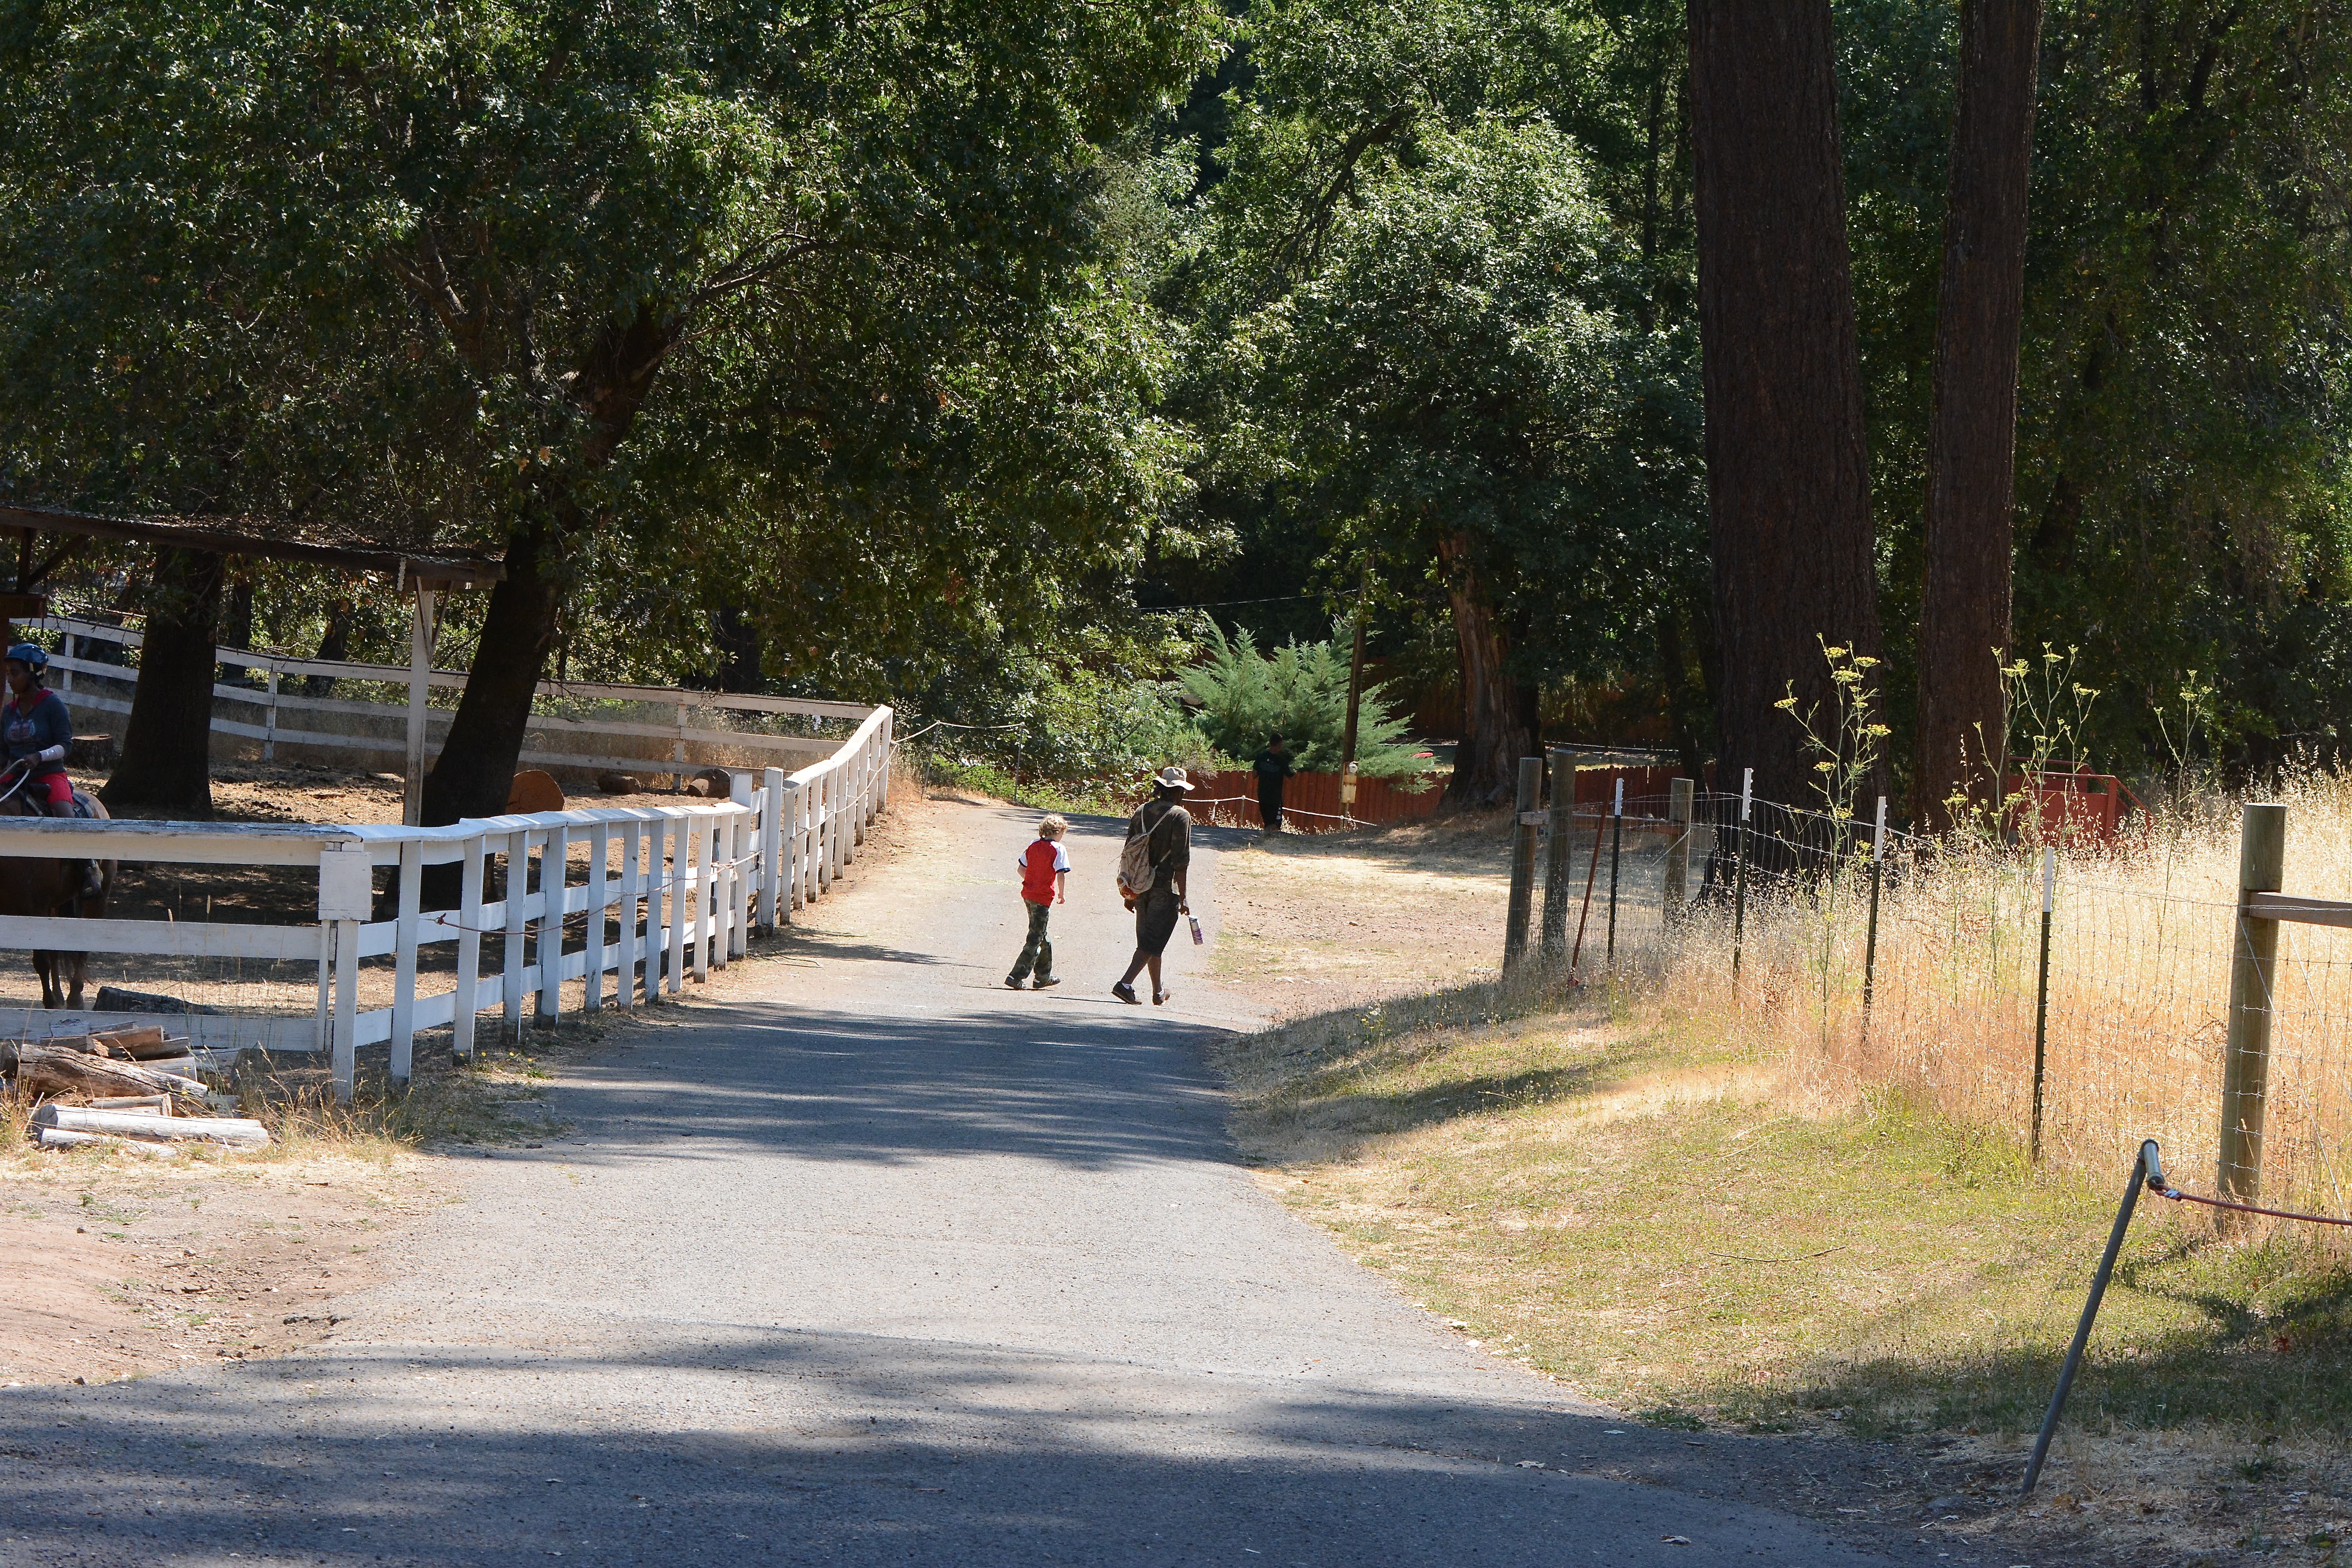 Young camper walks with a counselor down a peaceful path surrounded by green trees and a white picket fence at Enchanted Hills Camp.